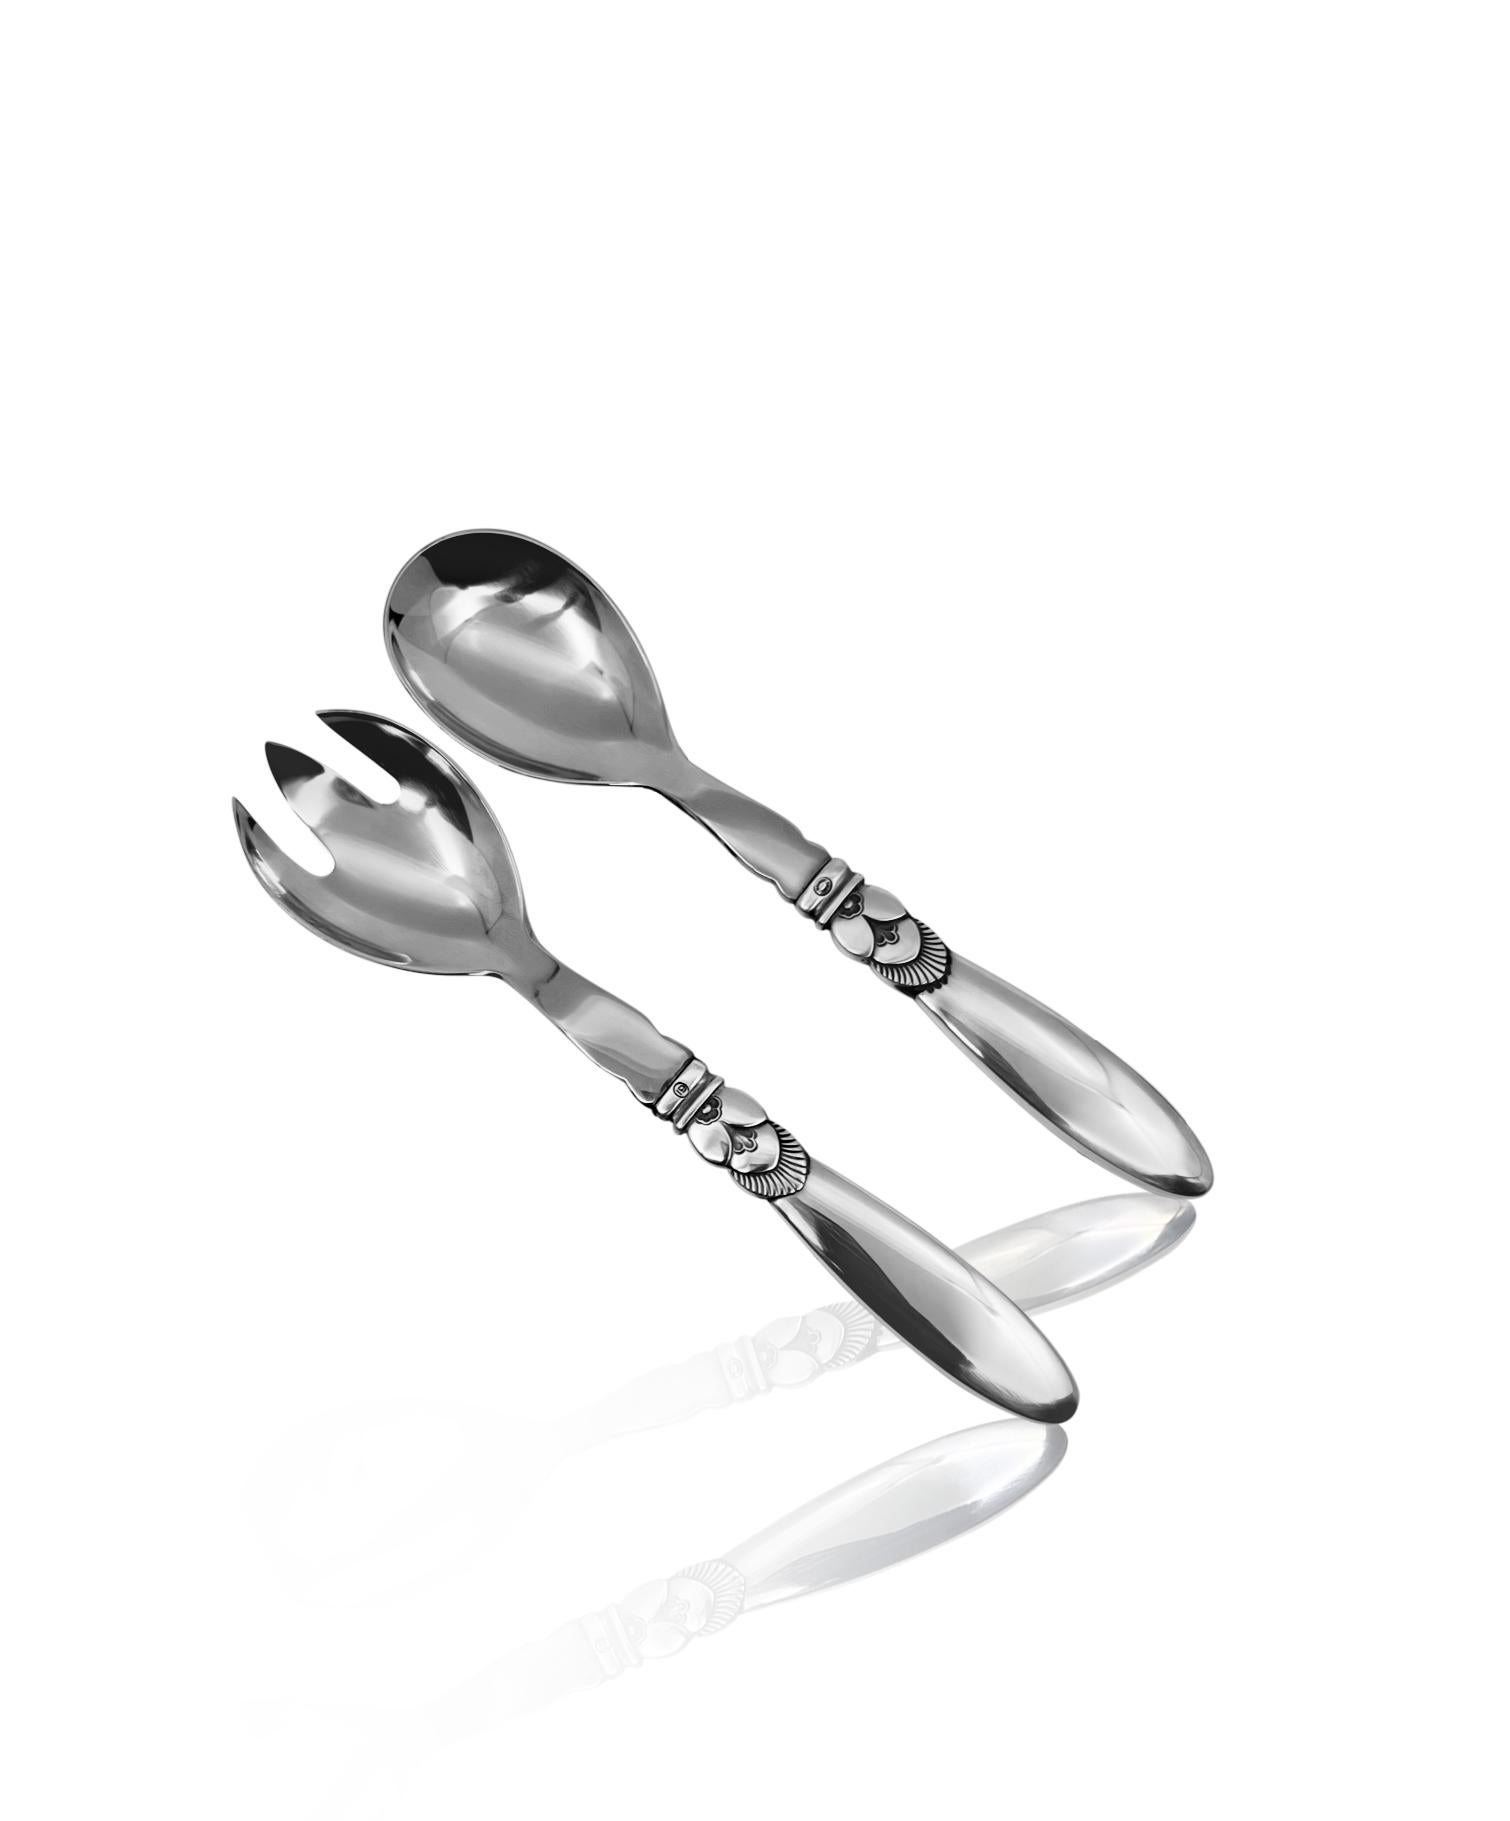 Sterling silver and stainless steel Georg Jensen small salad set, set 134 in the Cactus pattern, design #30 by Gundorph Albertus from 1930.

Additional information:
Material: Sterling Silver
Style: Art Deco
Hallmarks: With Georg Jensen hallmark,